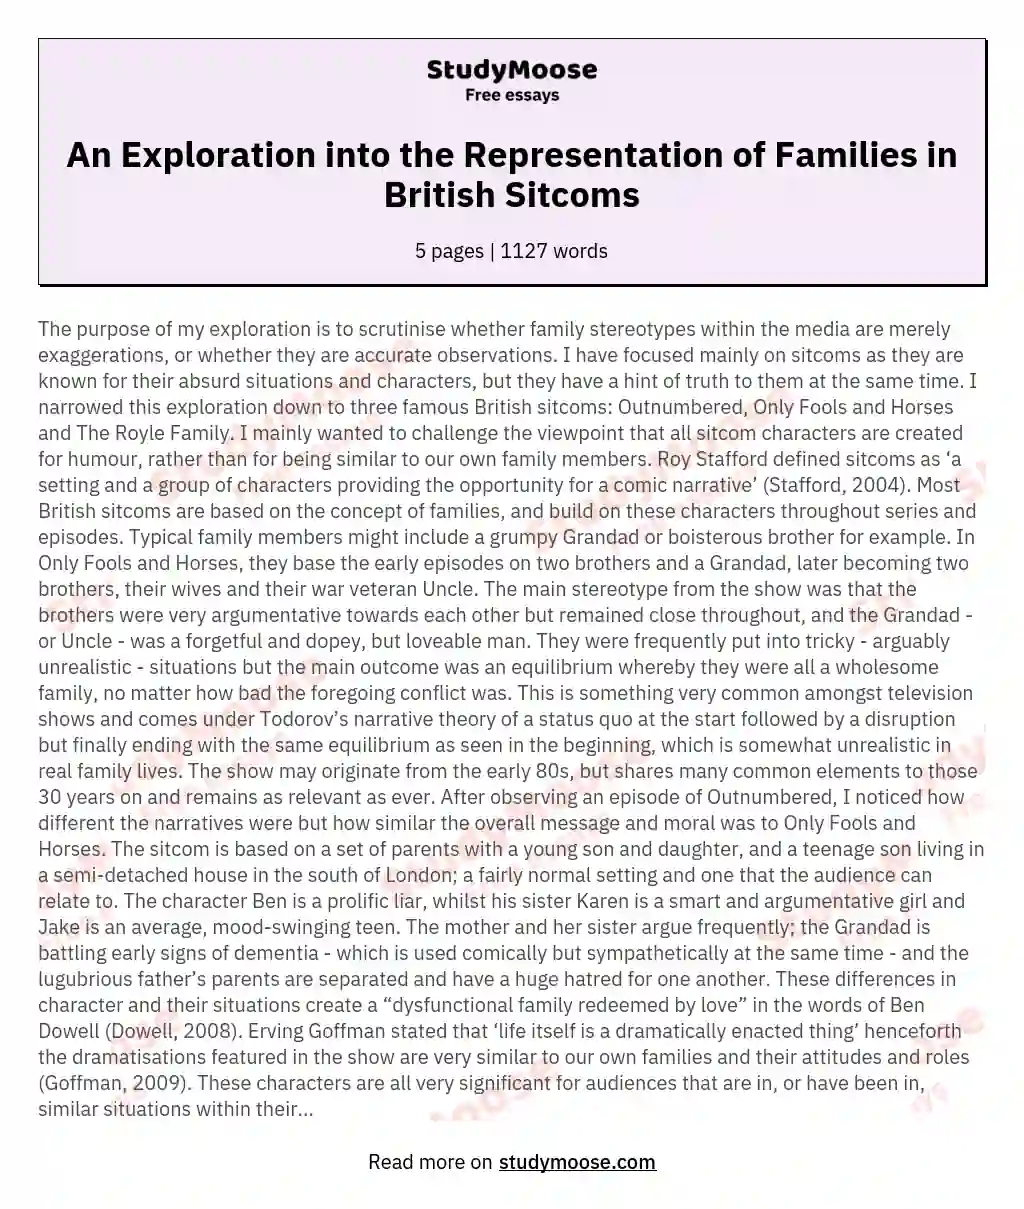 An Exploration into the Representation of Families in British Sitcoms essay